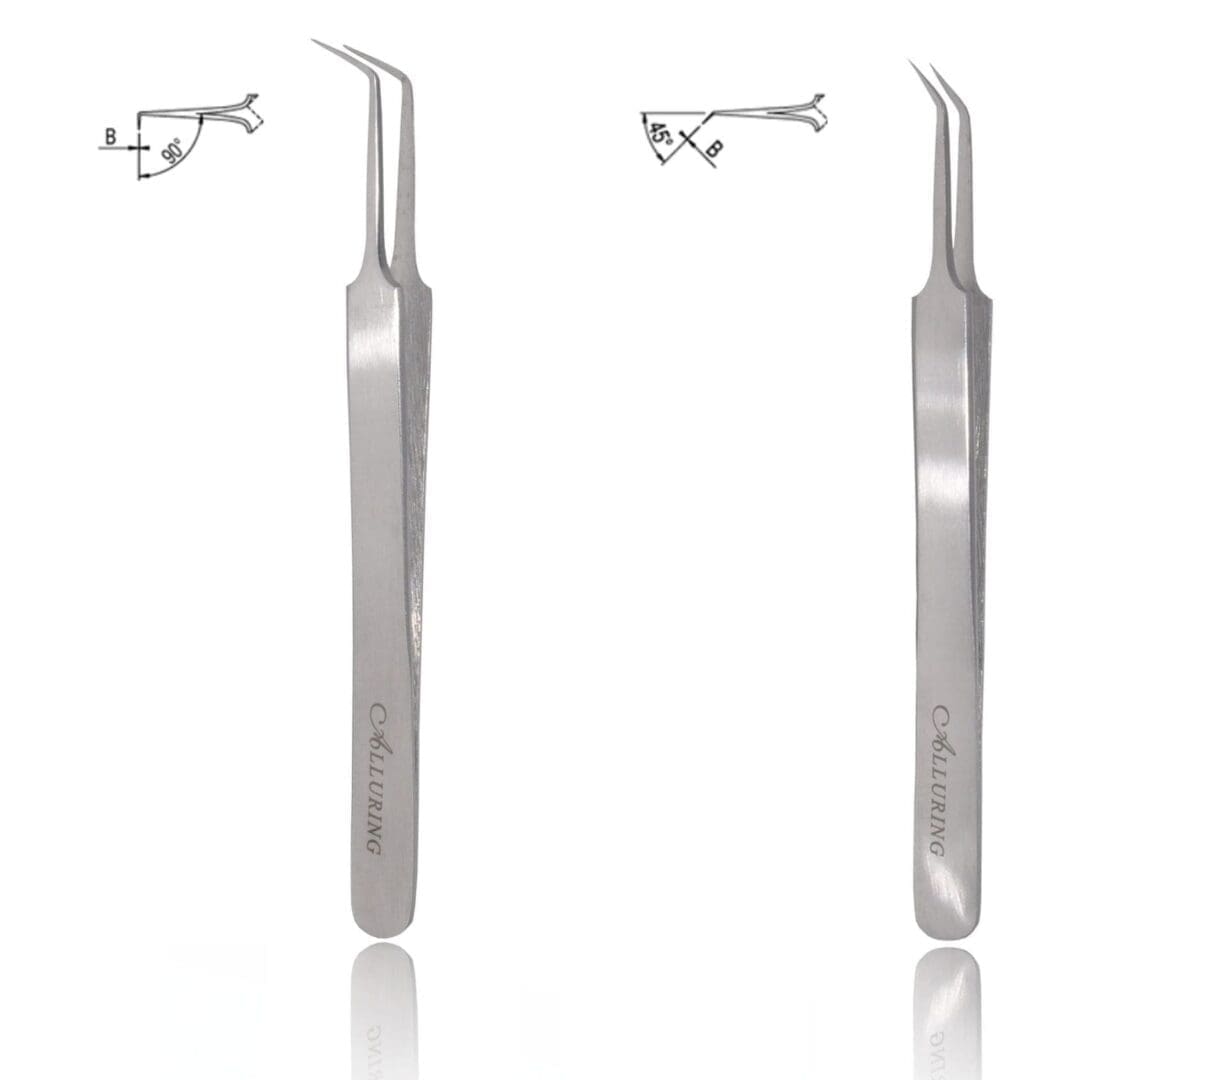 A pair of tweezers with one being the same size.